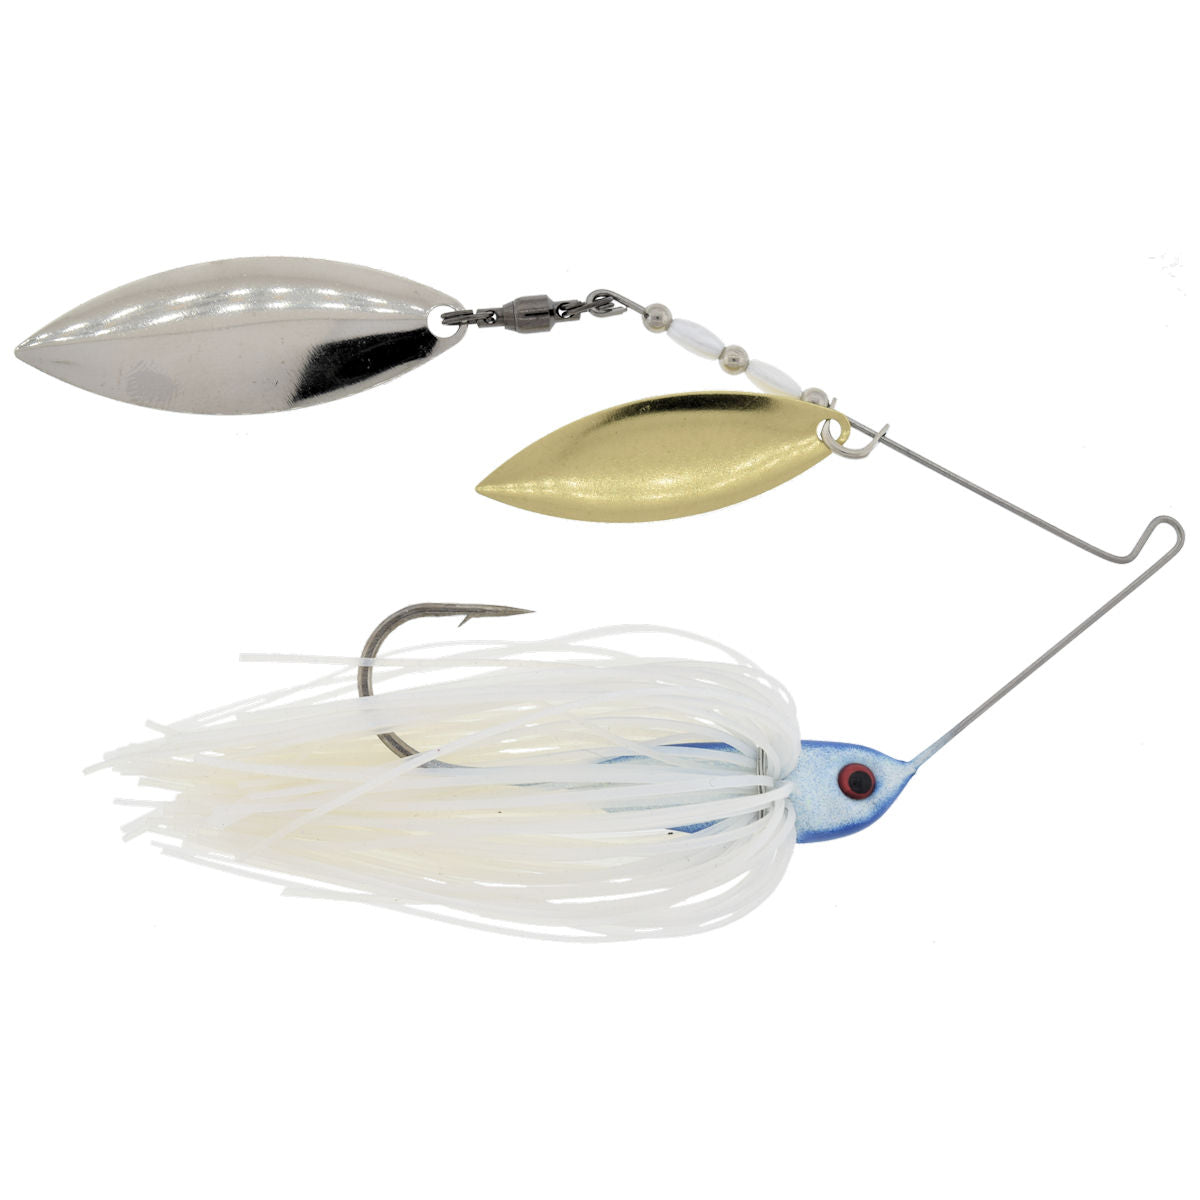 Glimmer Series Double Willow Spinnerbait_Blue Glimmer Gold/Silver